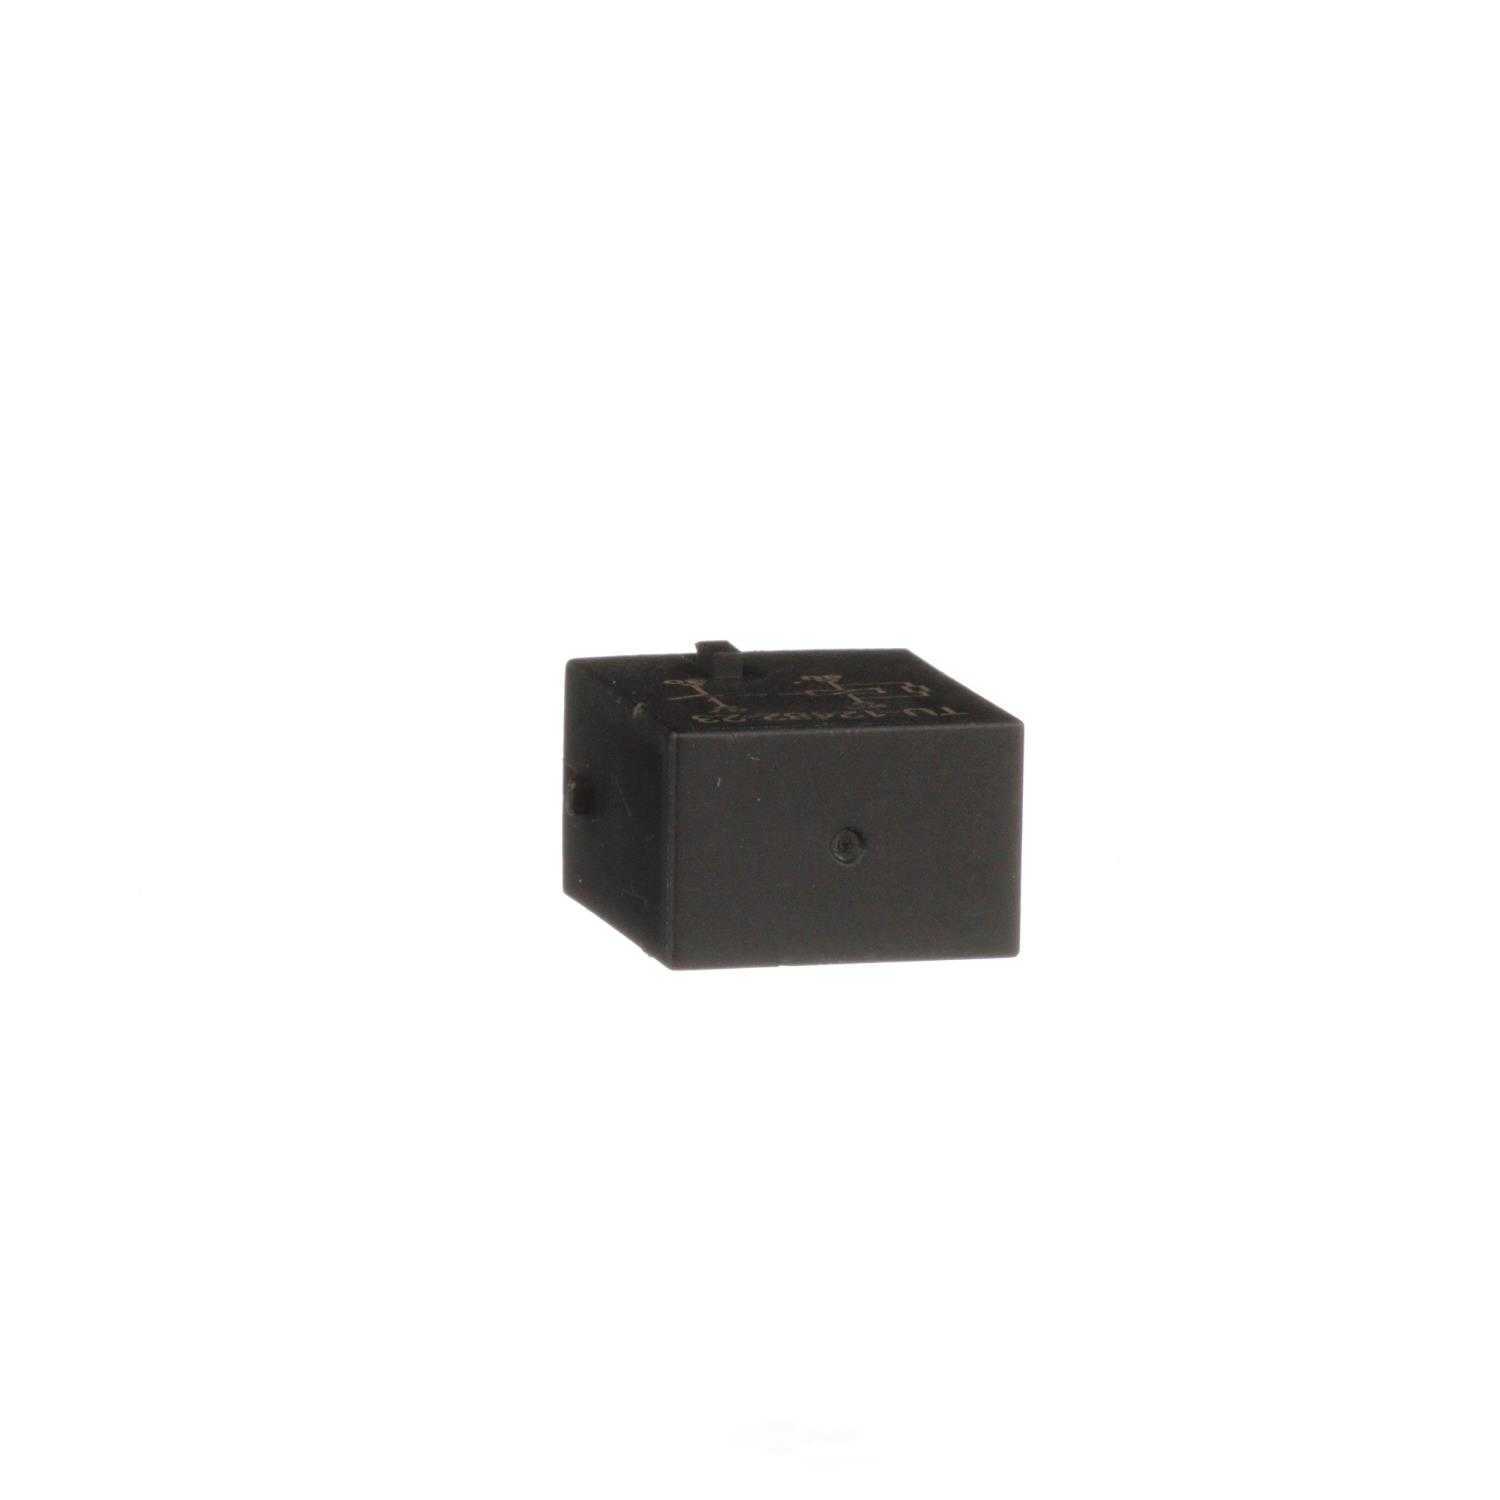 STANDARD MOTOR PRODUCTS - Throttle Control Relay - STA RY-1651